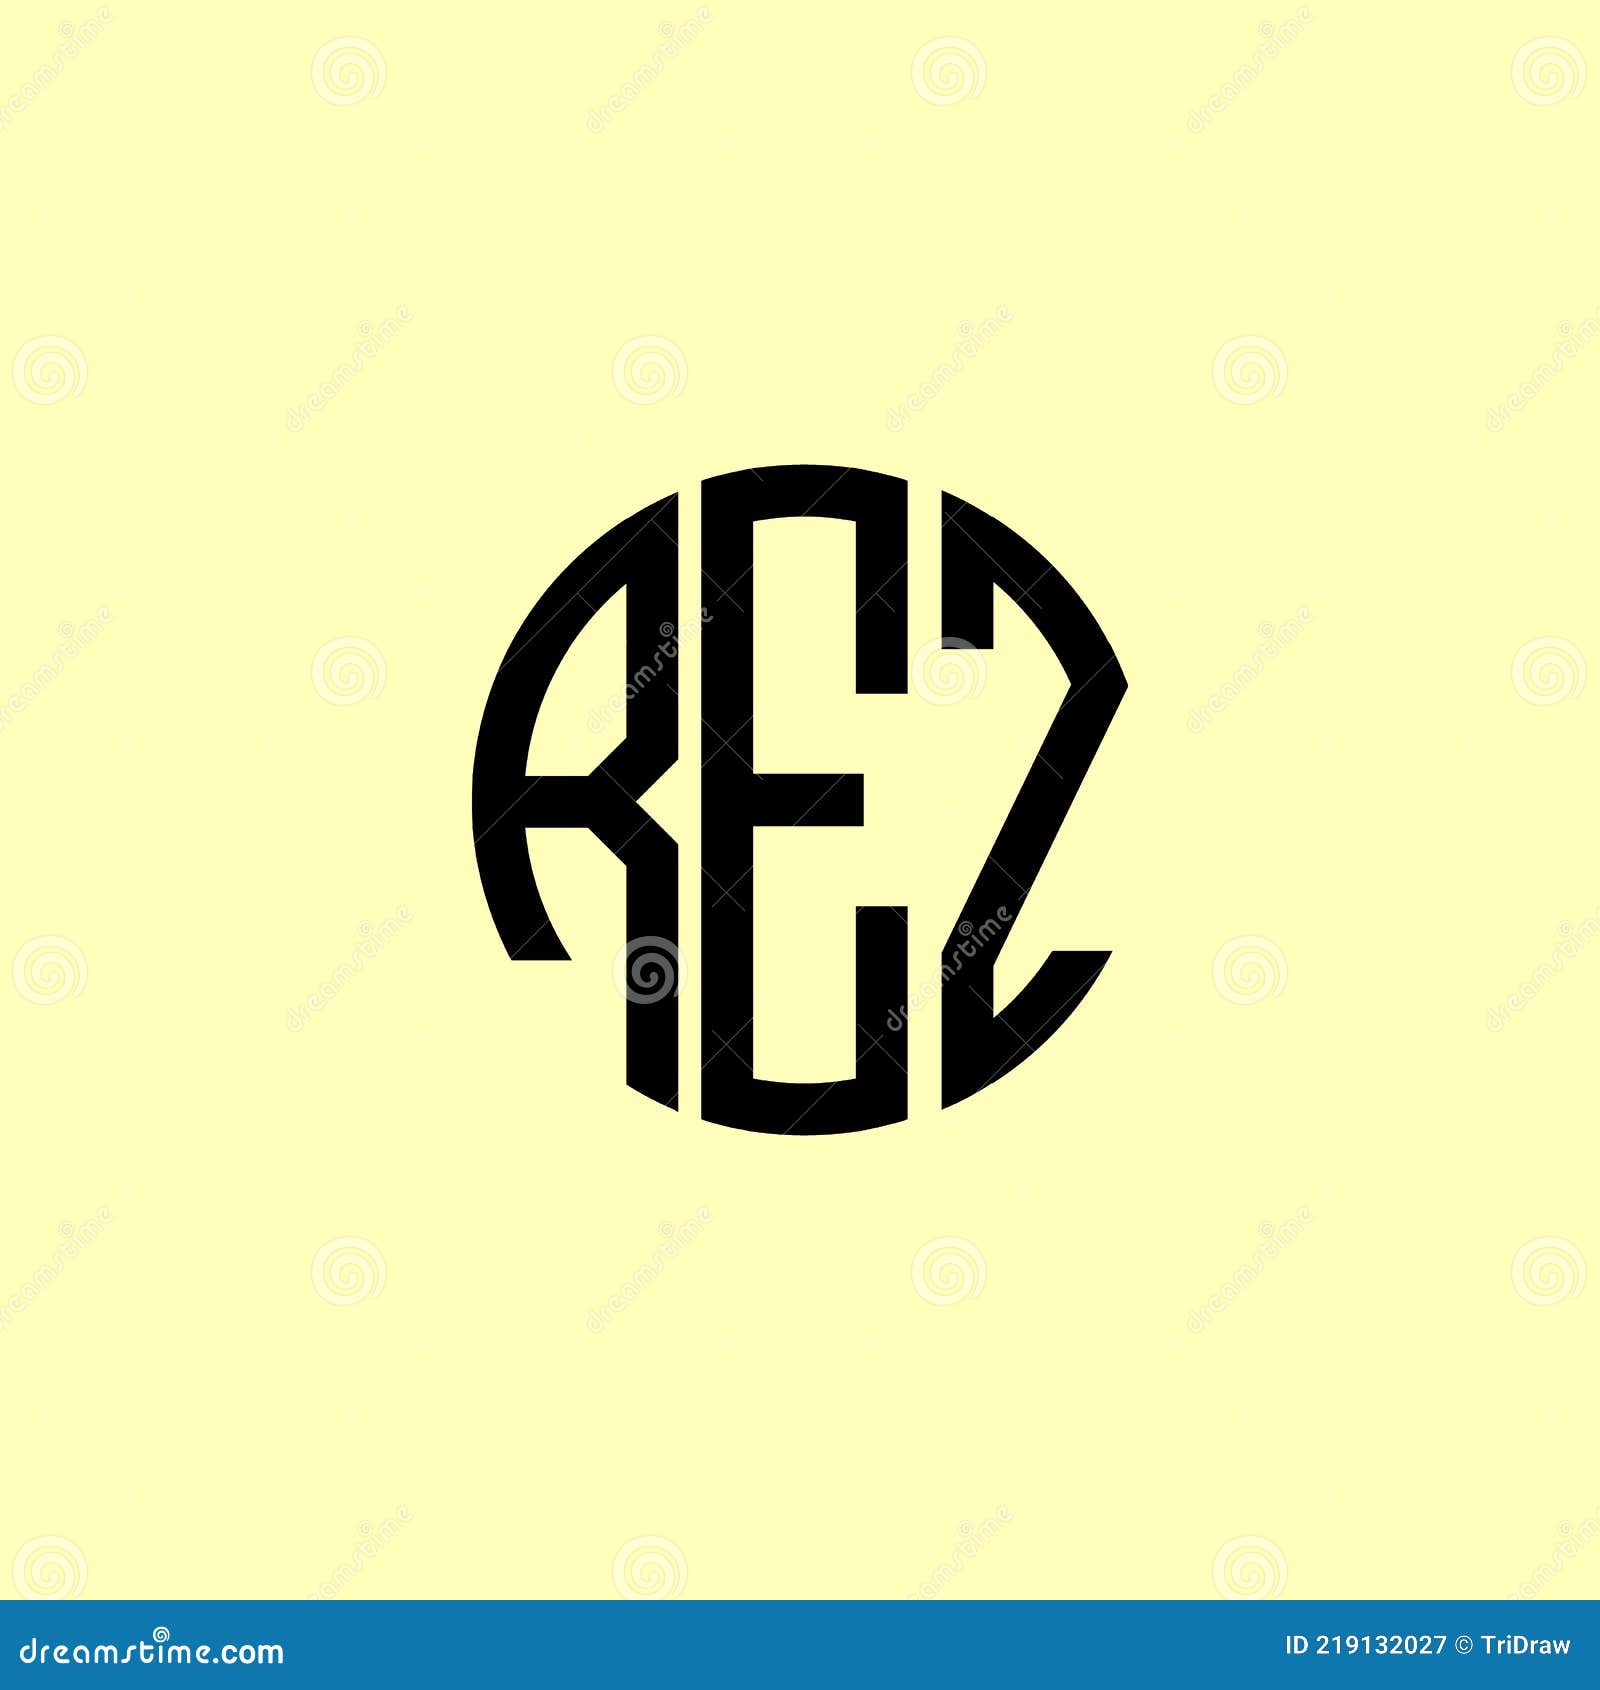 creative rounded initial letters rez logo